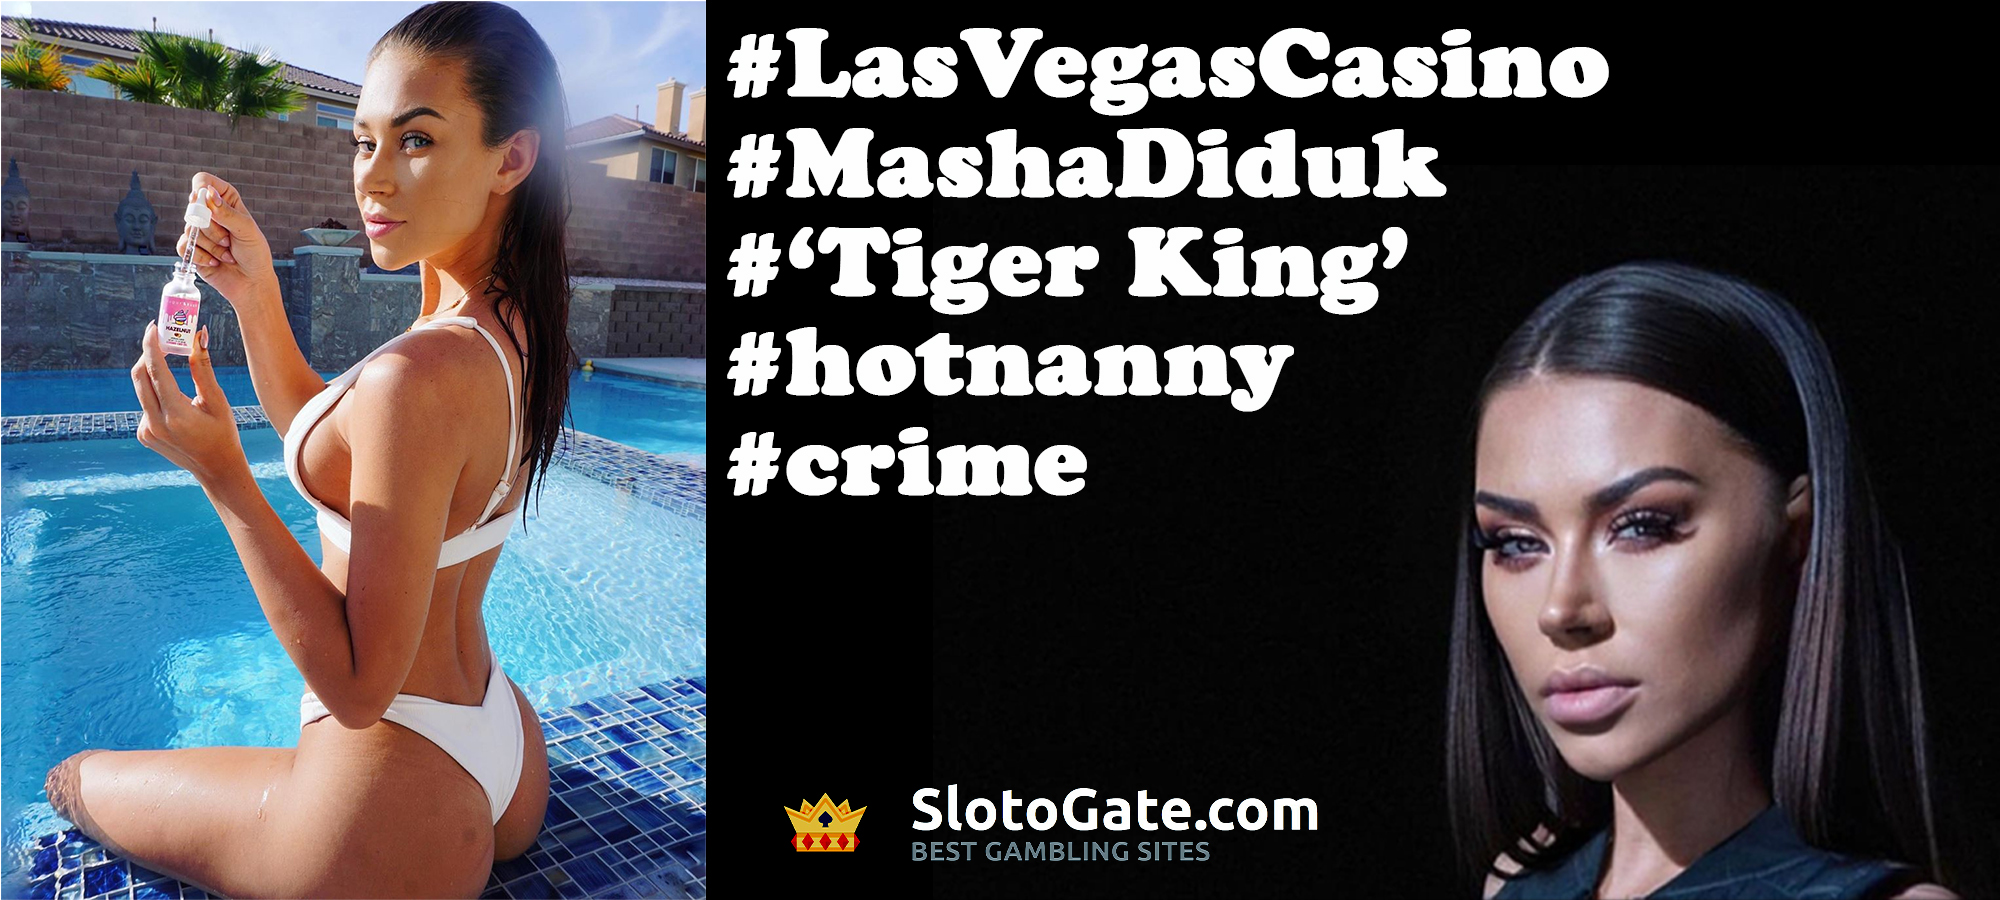 Masha Diduk, Tiger King's “Hot Nanny”, Busted for Stealing in LA Casino